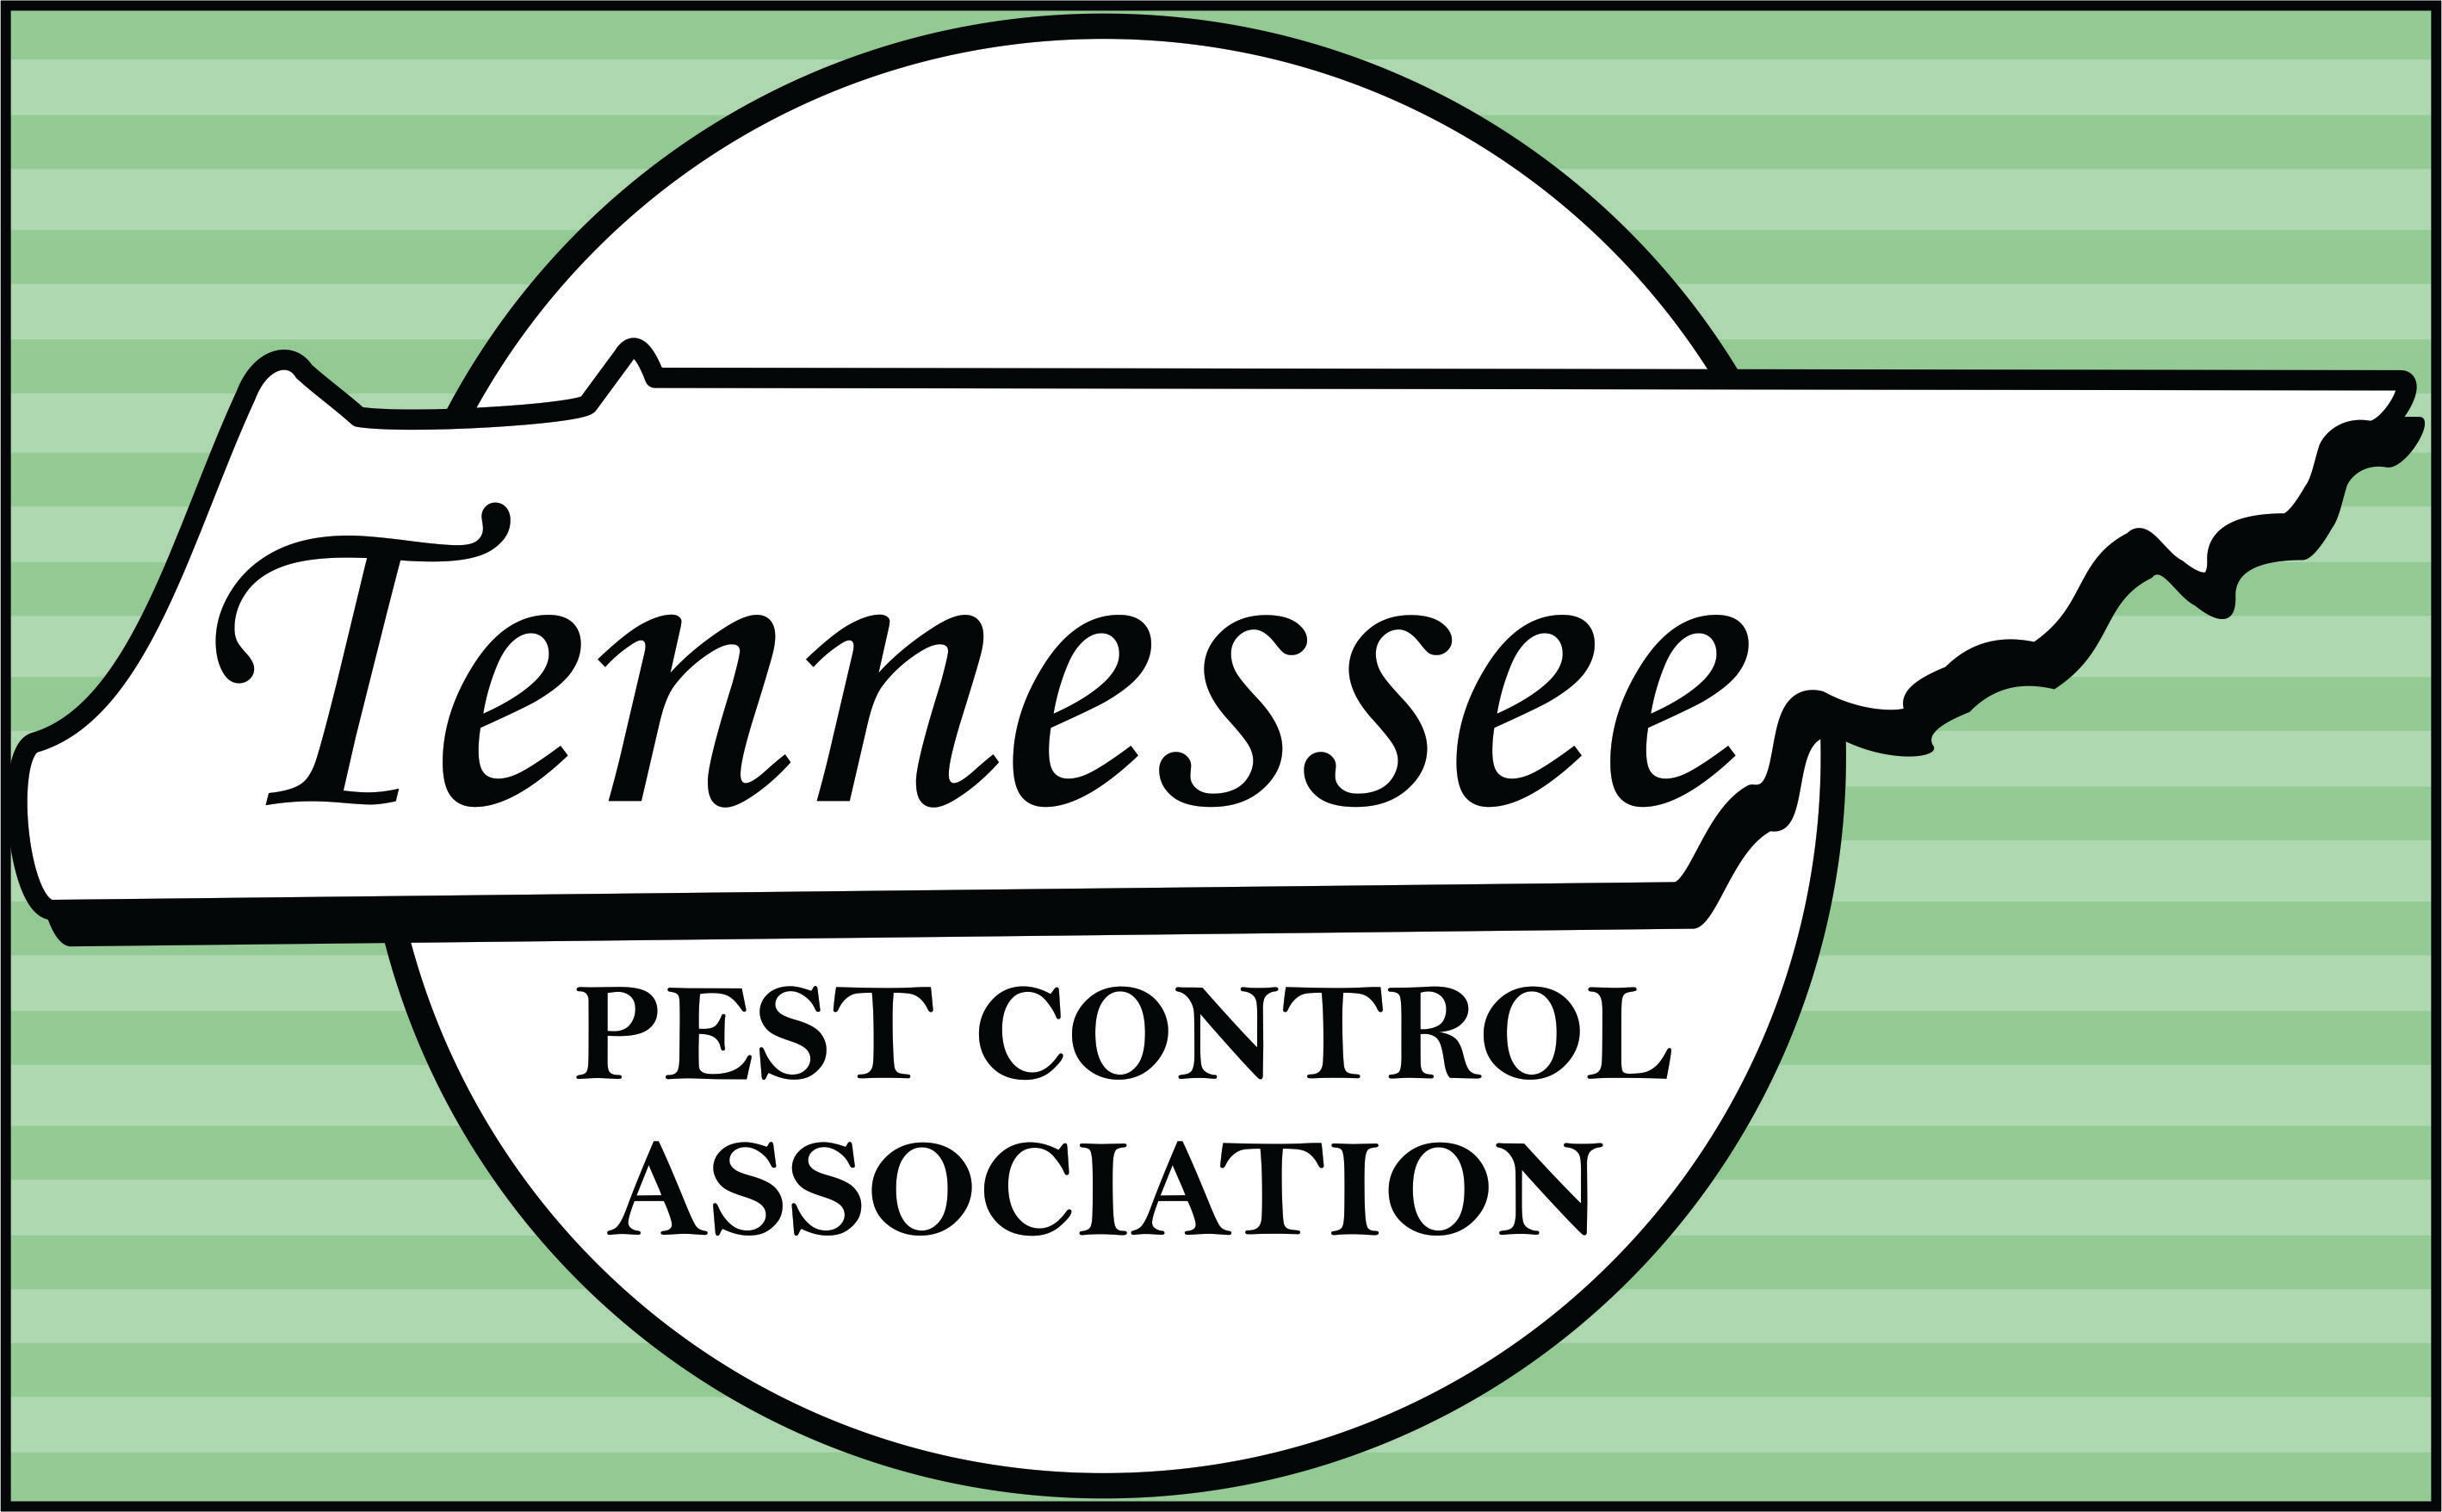 Ace Exterminating Co. is a proud member of the Tennessee Pest Control Association